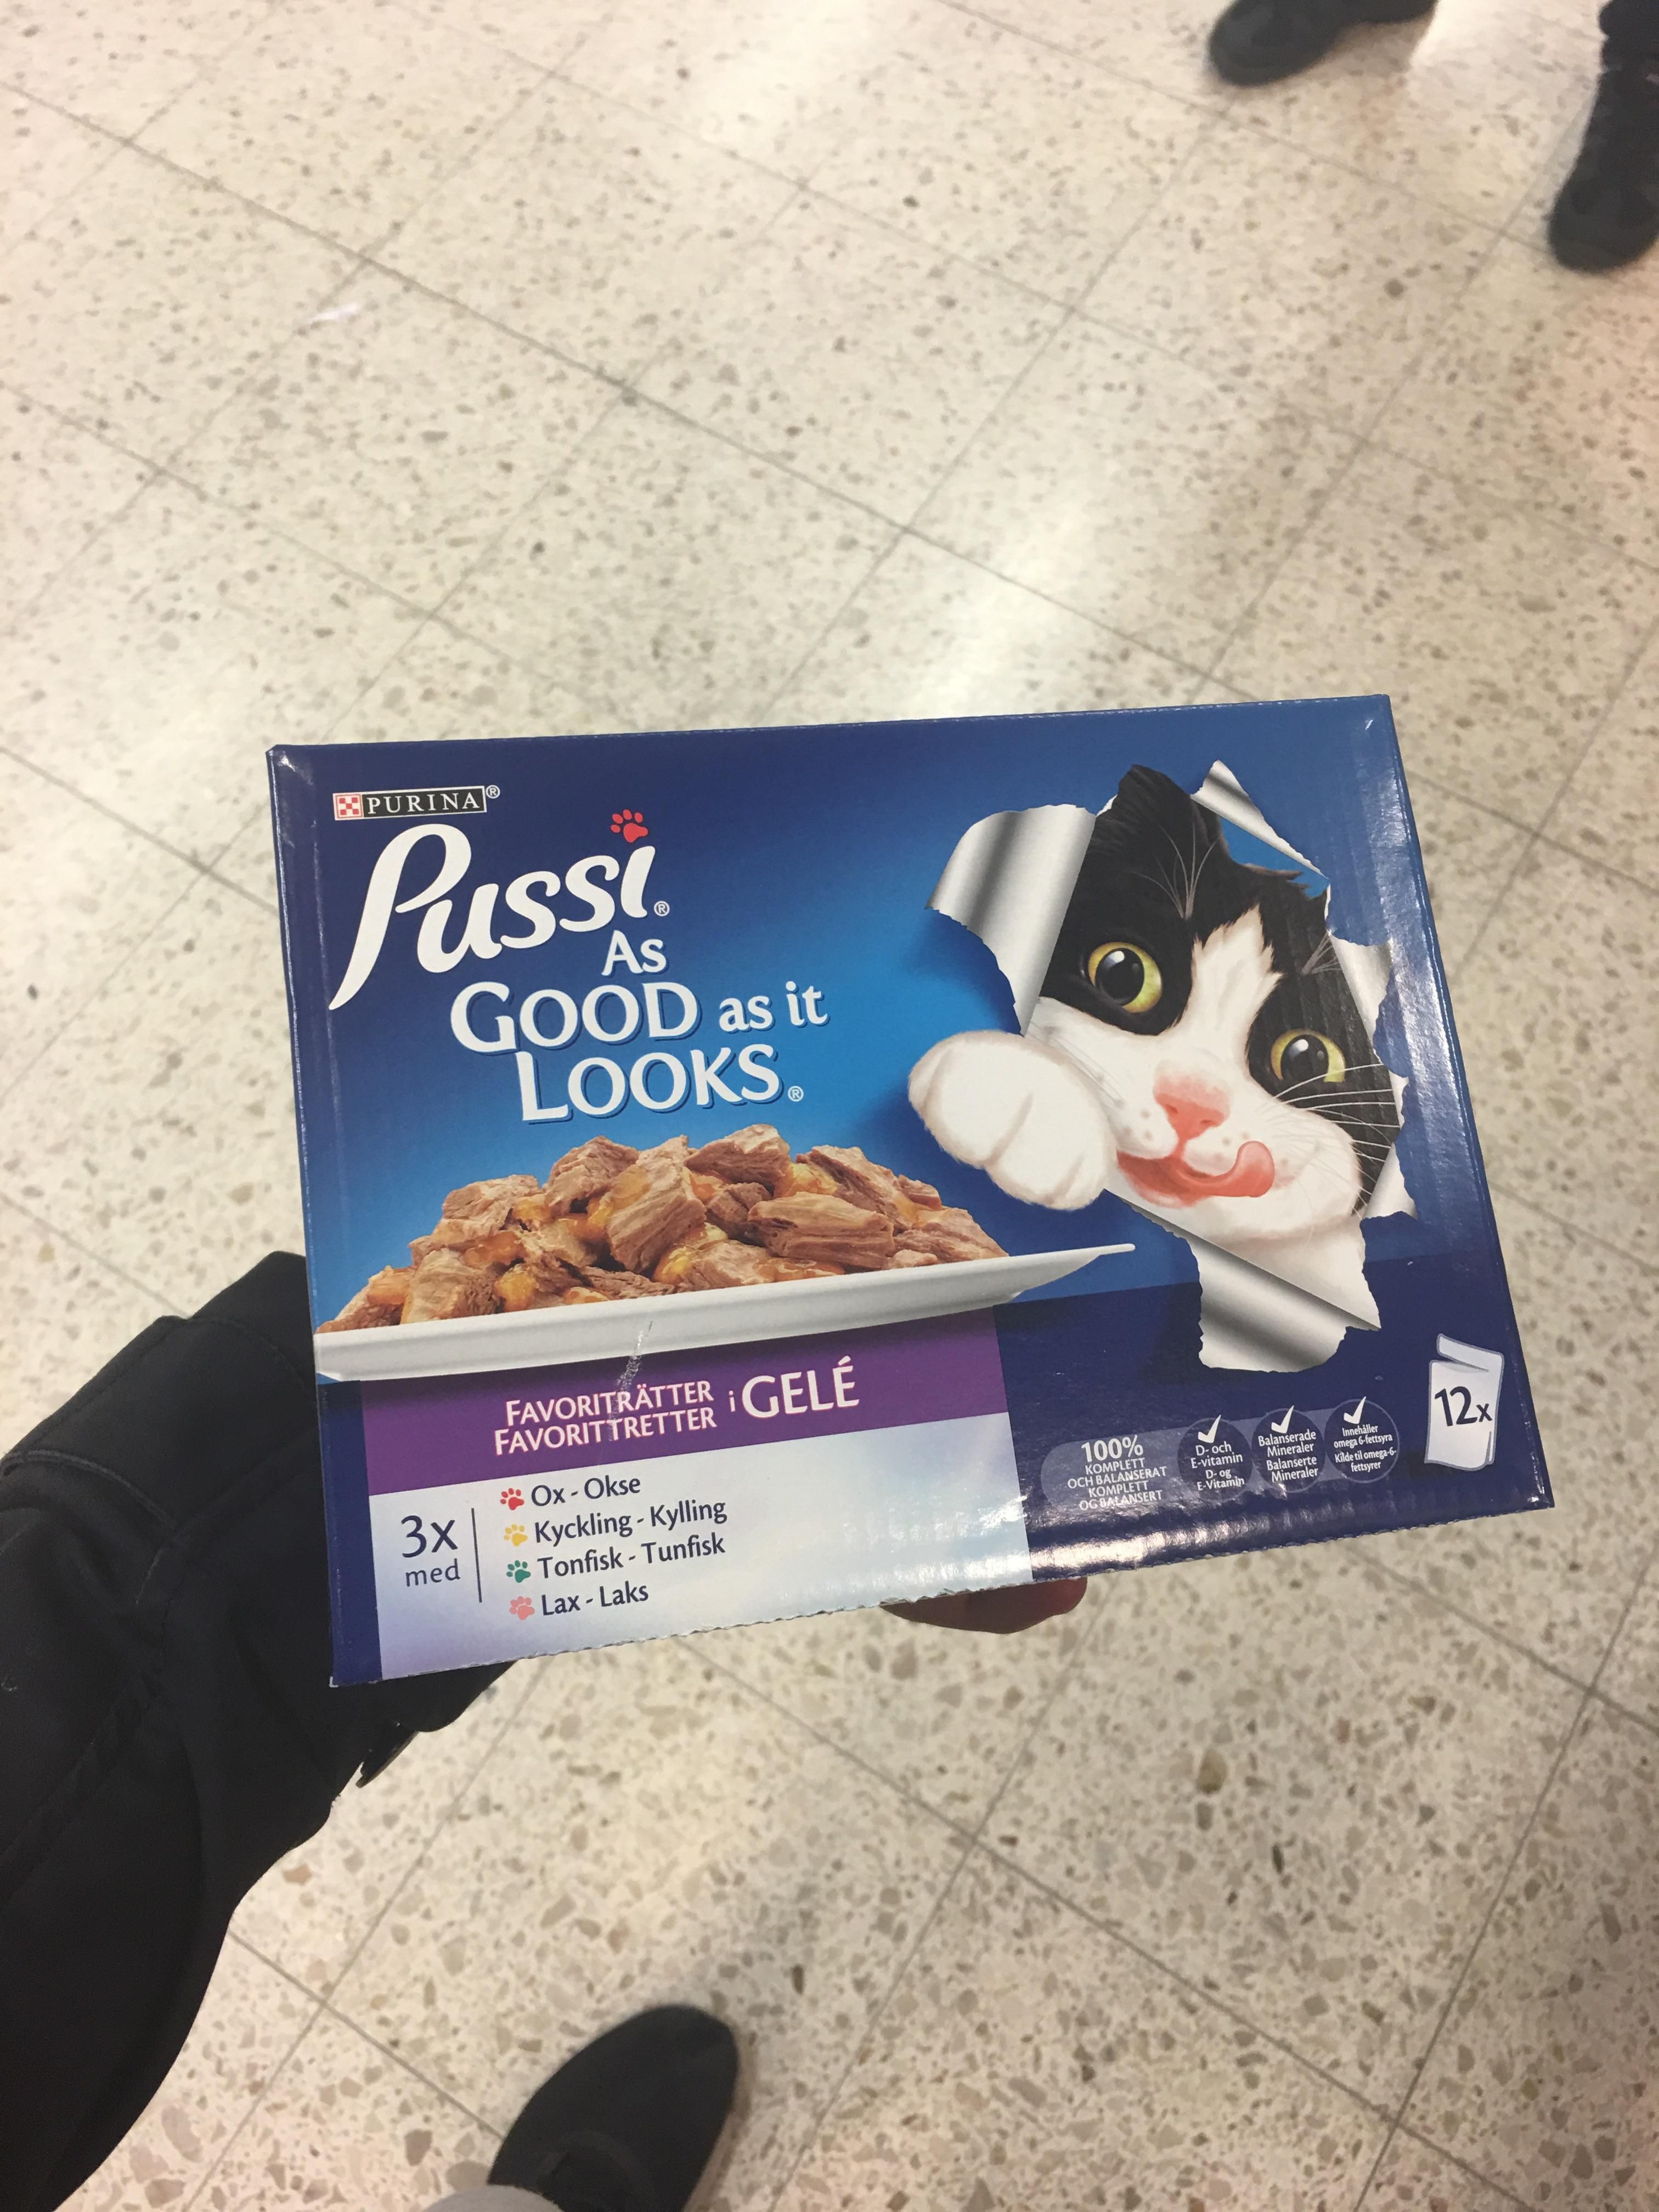 In sweden the cats eat pussi.